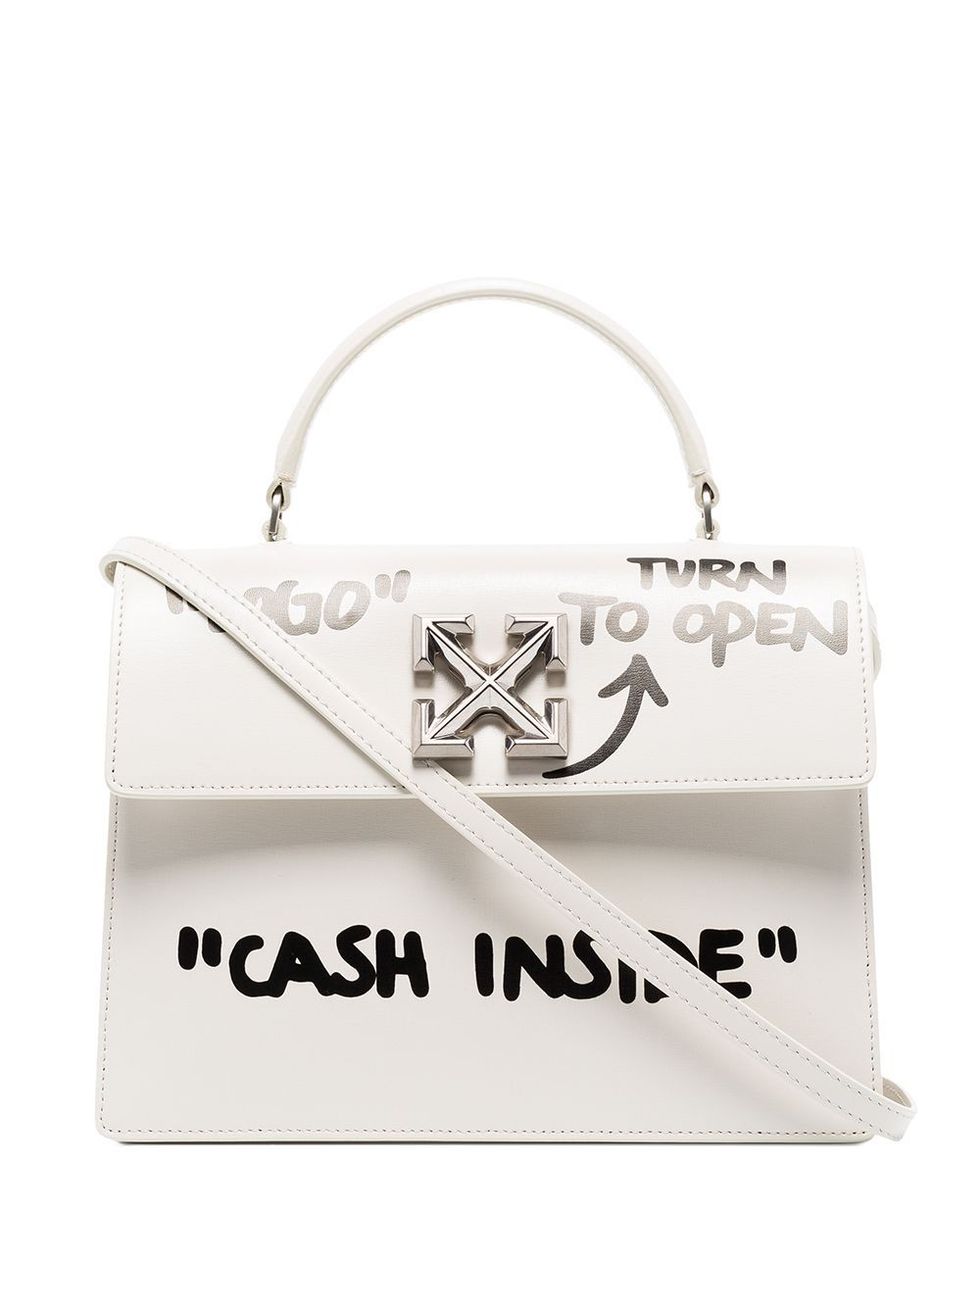 Off-White Debuts Meteor Bag Filled With Holes at Spring 2020 Show